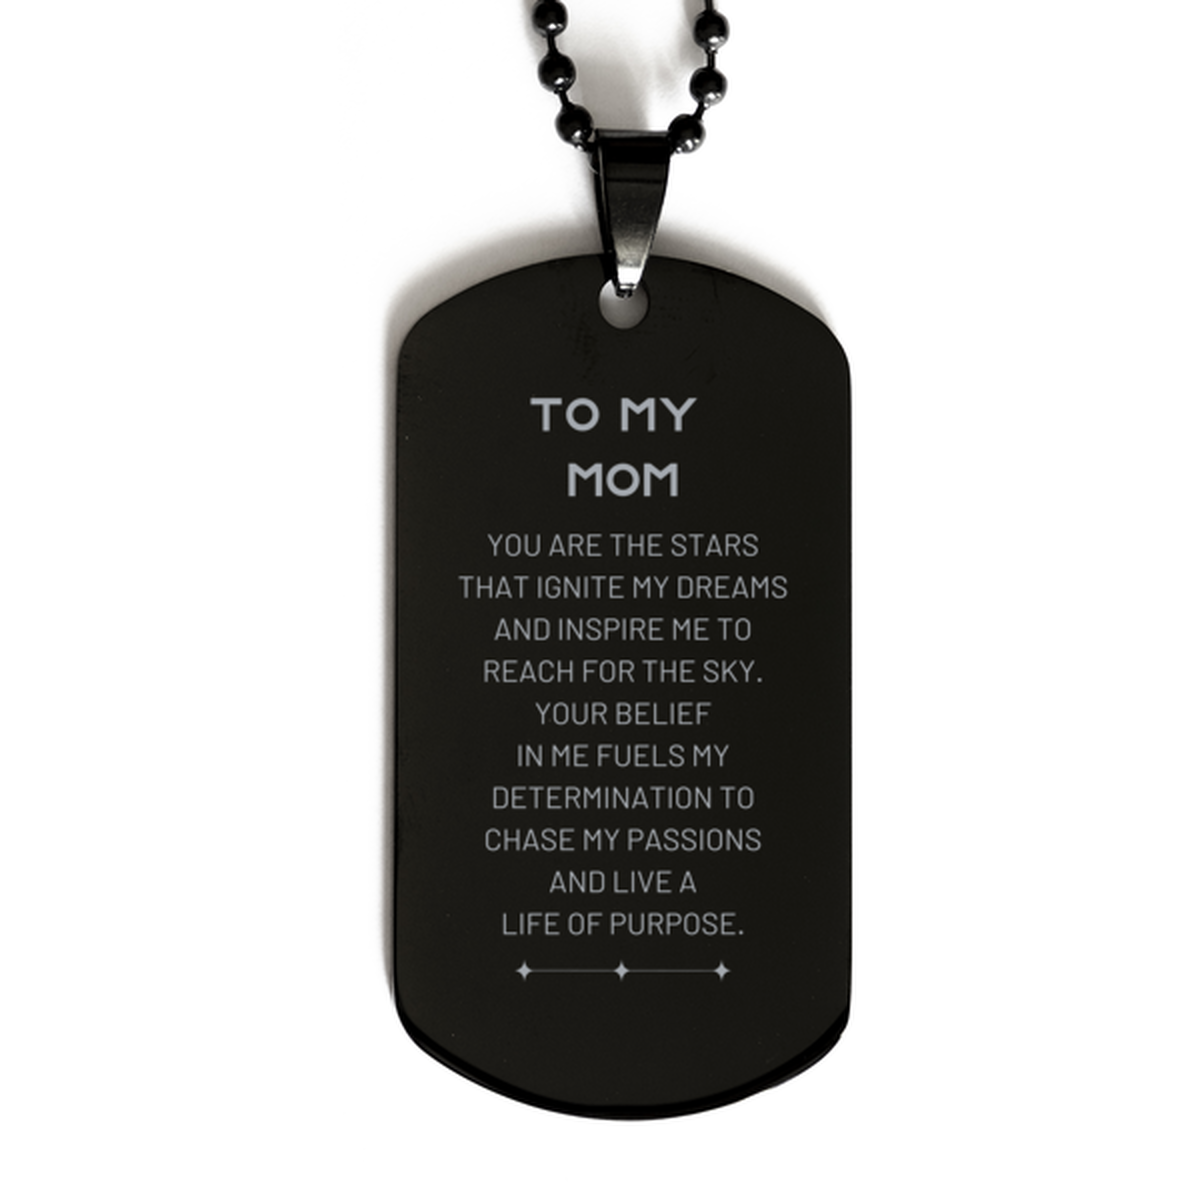 To My Mom Black Dog Tag, You are the stars that ignite my dreams and inspire me to reach for the sky, Birthday Unique Gifts For Mom, Thank You Gifts For Mom